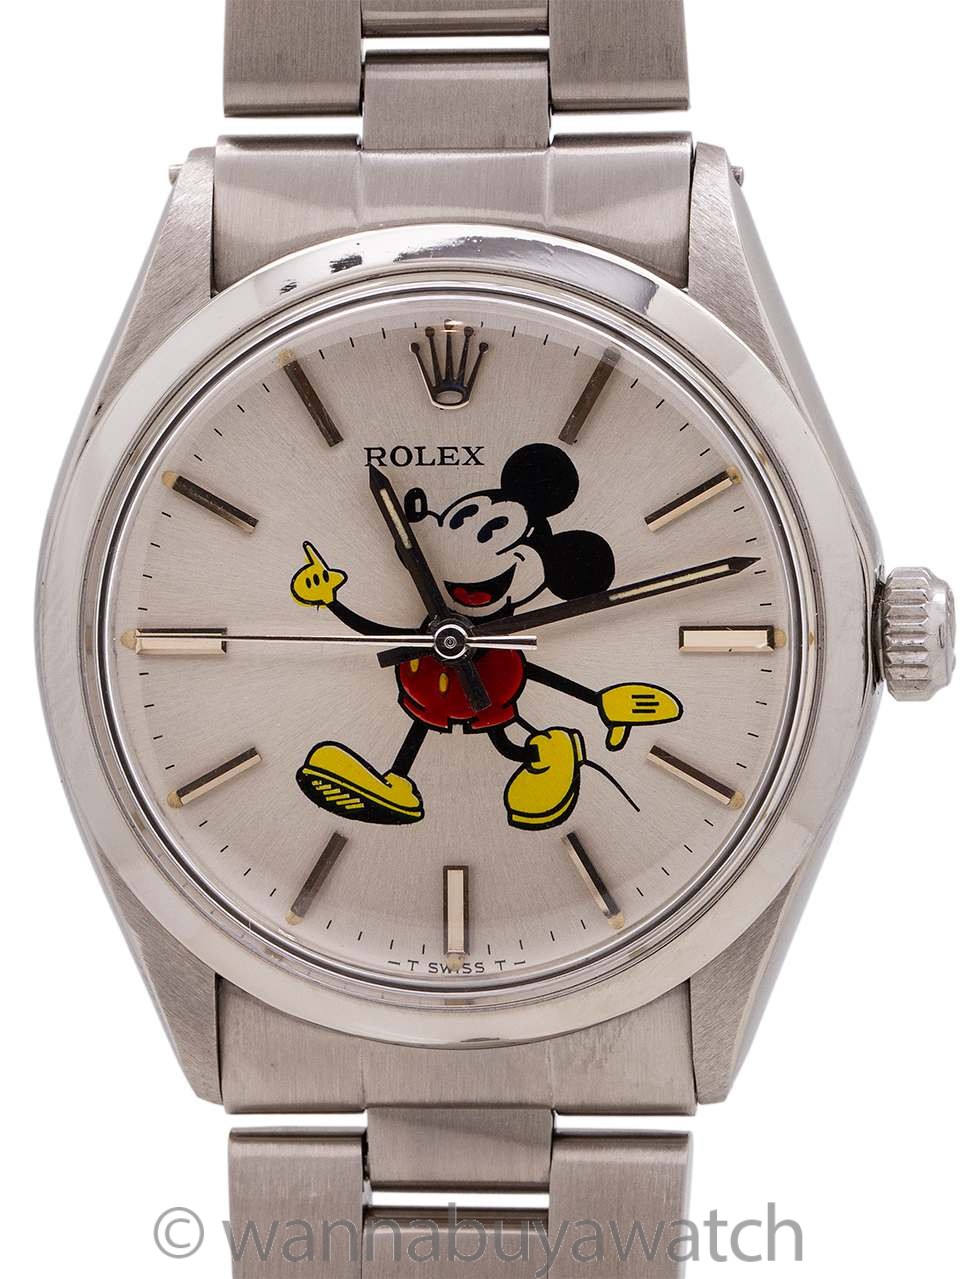 Rolex Oyster Perpetual ref 5500 custom Mickey Mouse circa 1981